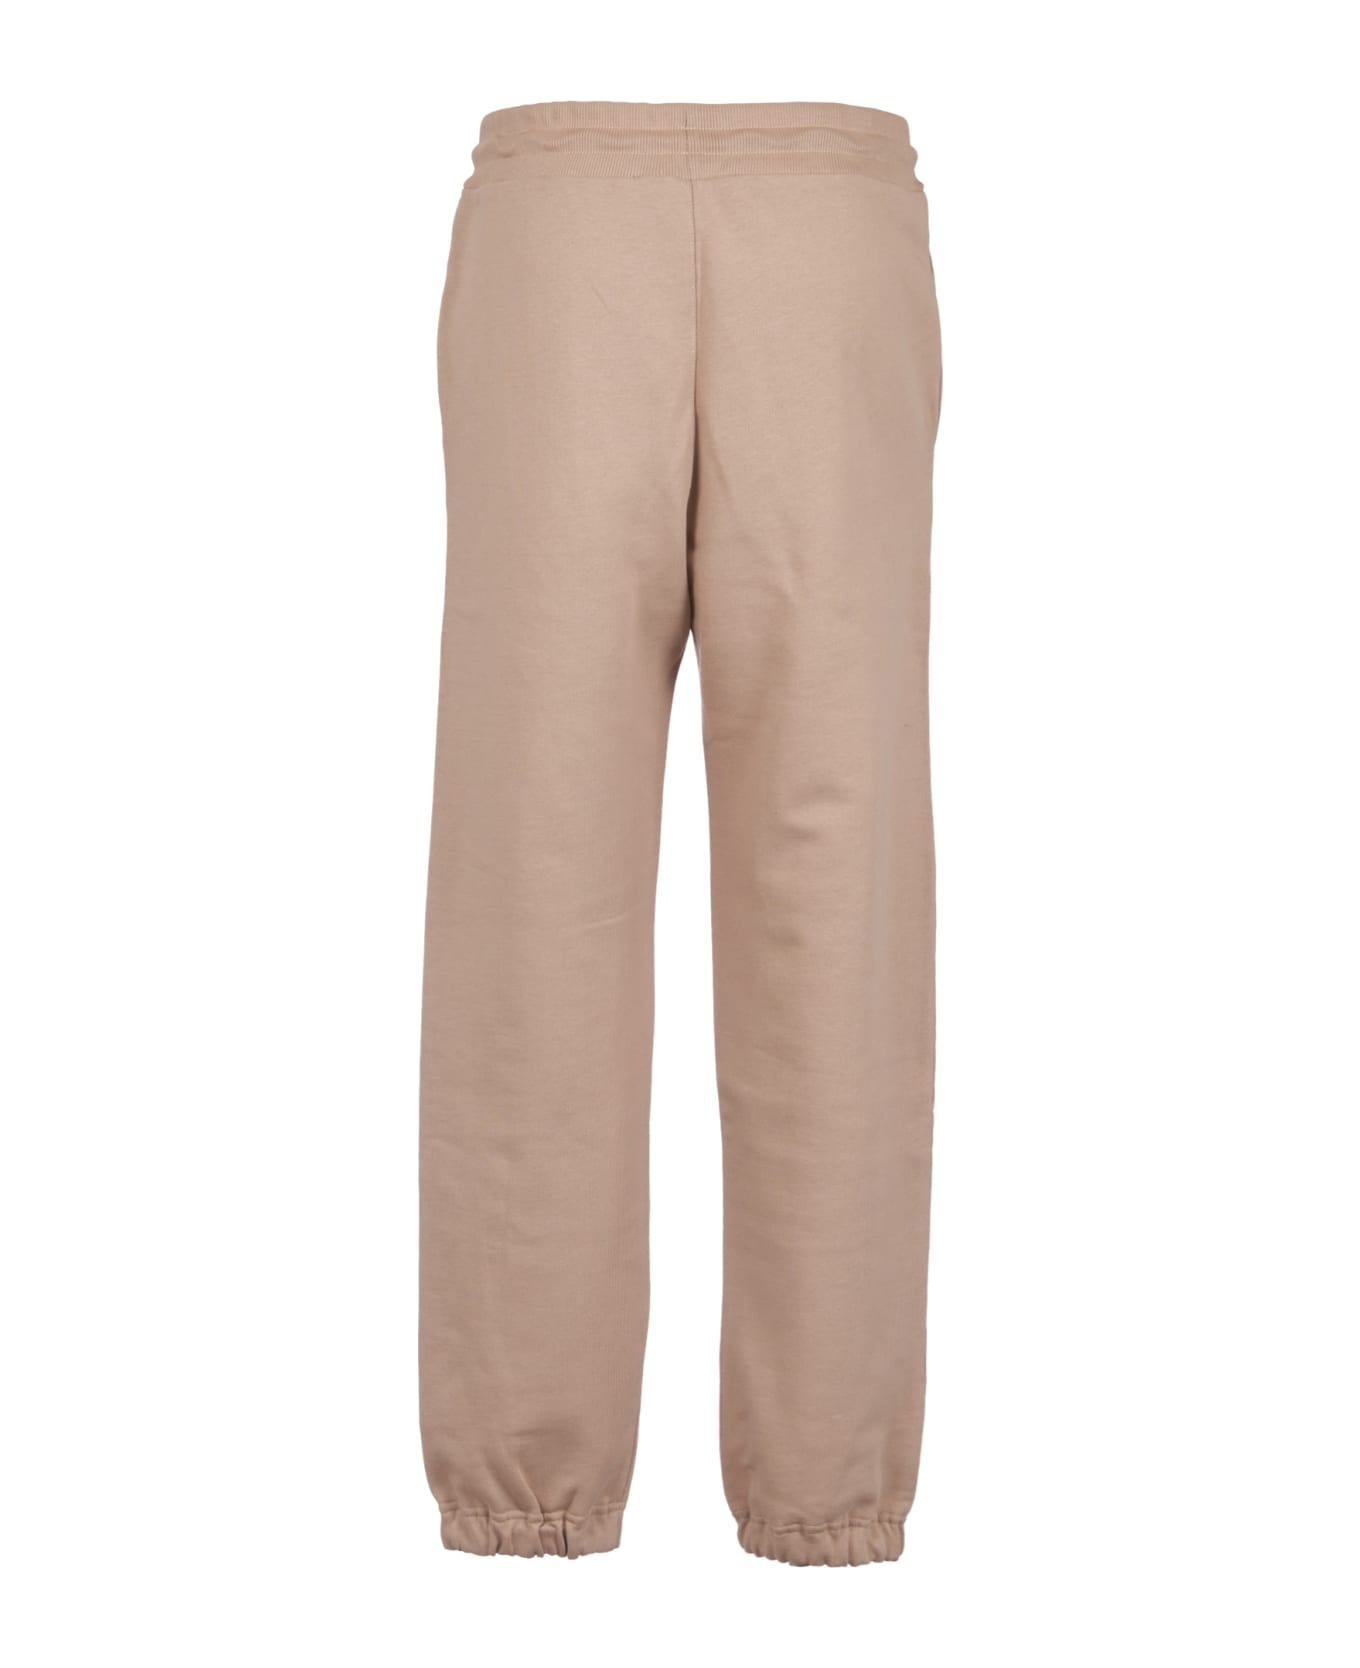 MSGM Lace-up Cargo Track Pants - Beige